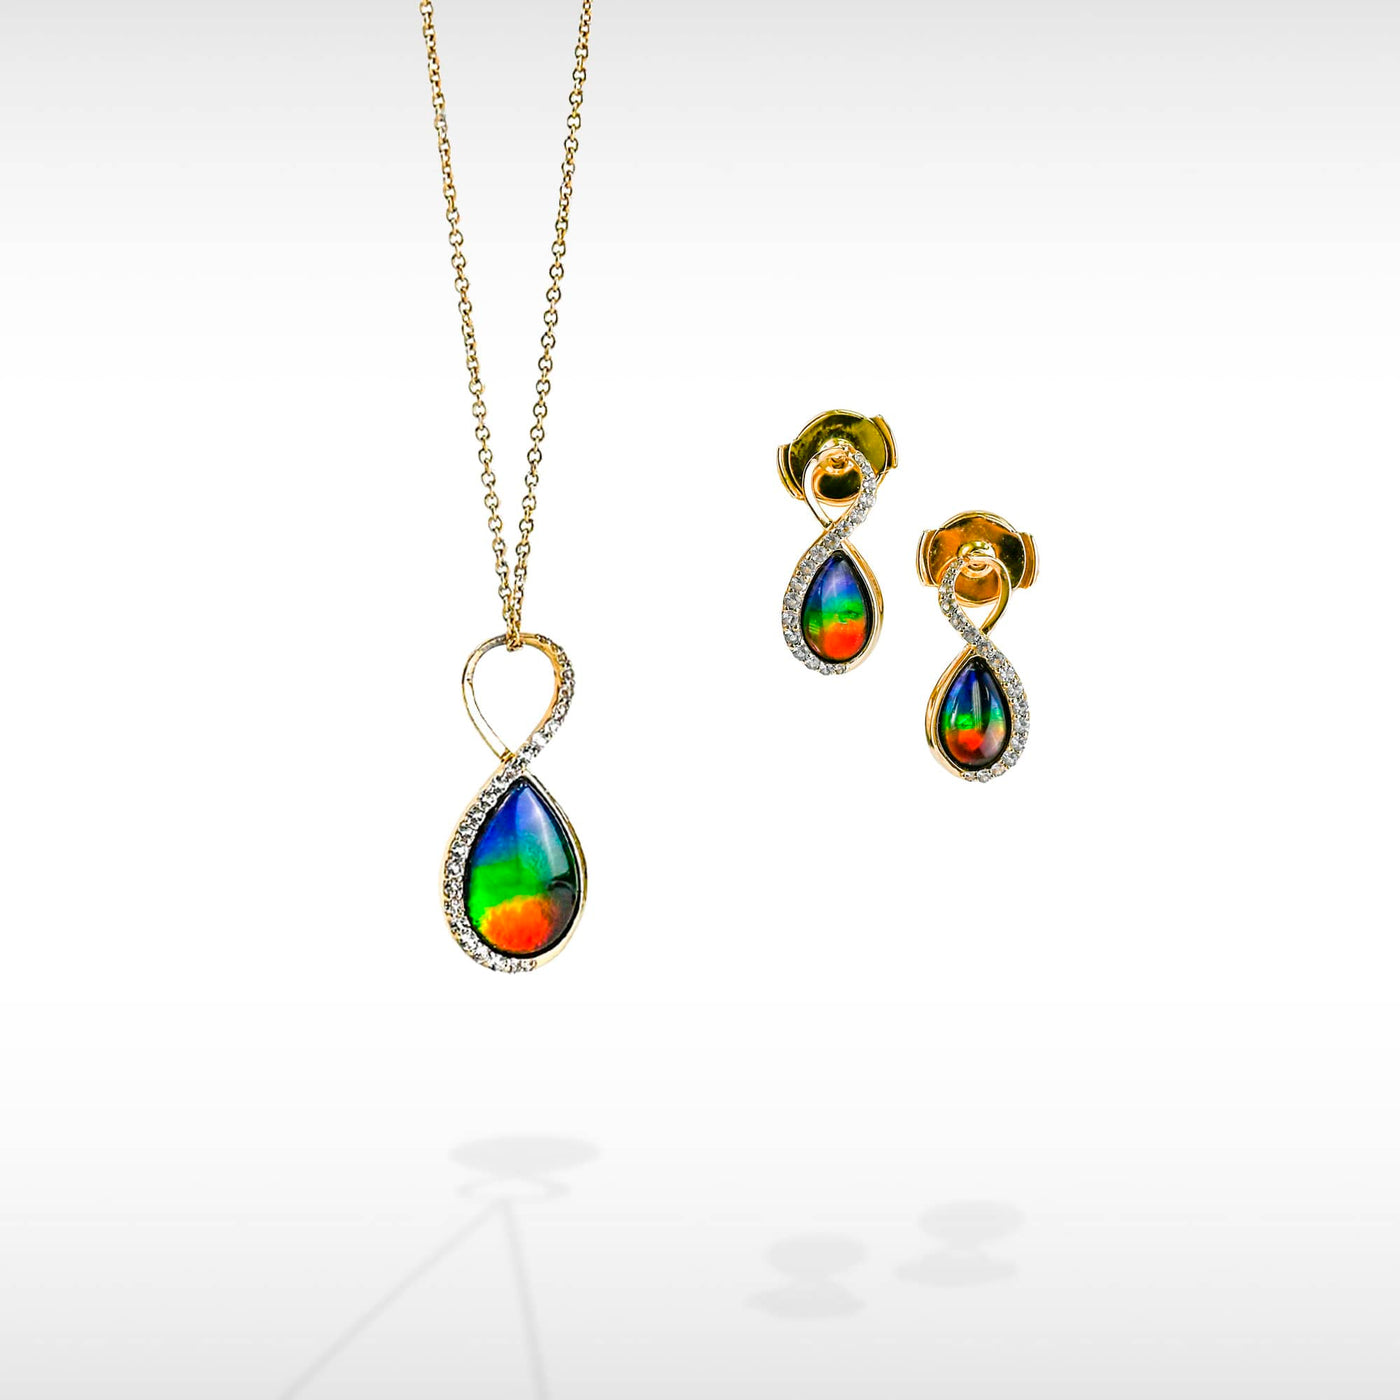 Infinity ammolite pendant and earring set with white diamonds in 14K gold